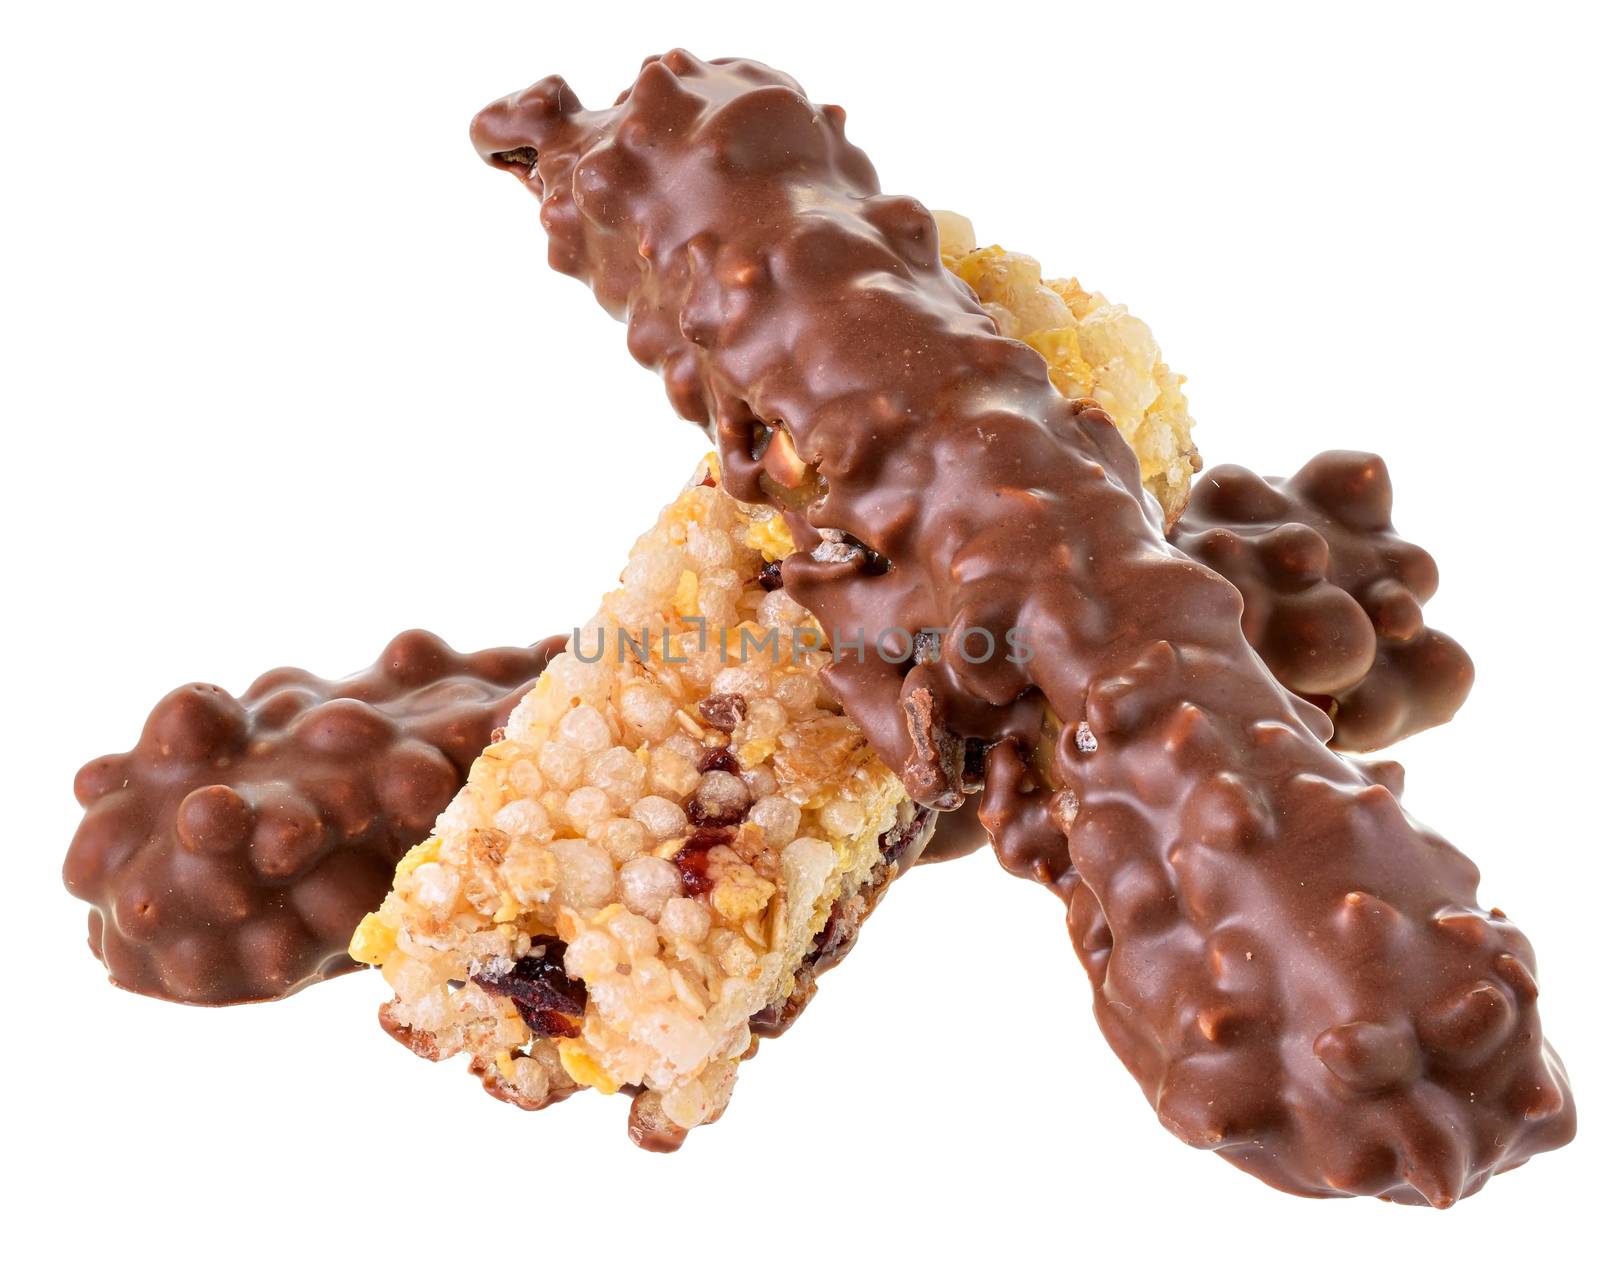  Chocolate bar with peanut, caramel and puffed rice isolated on a white background.